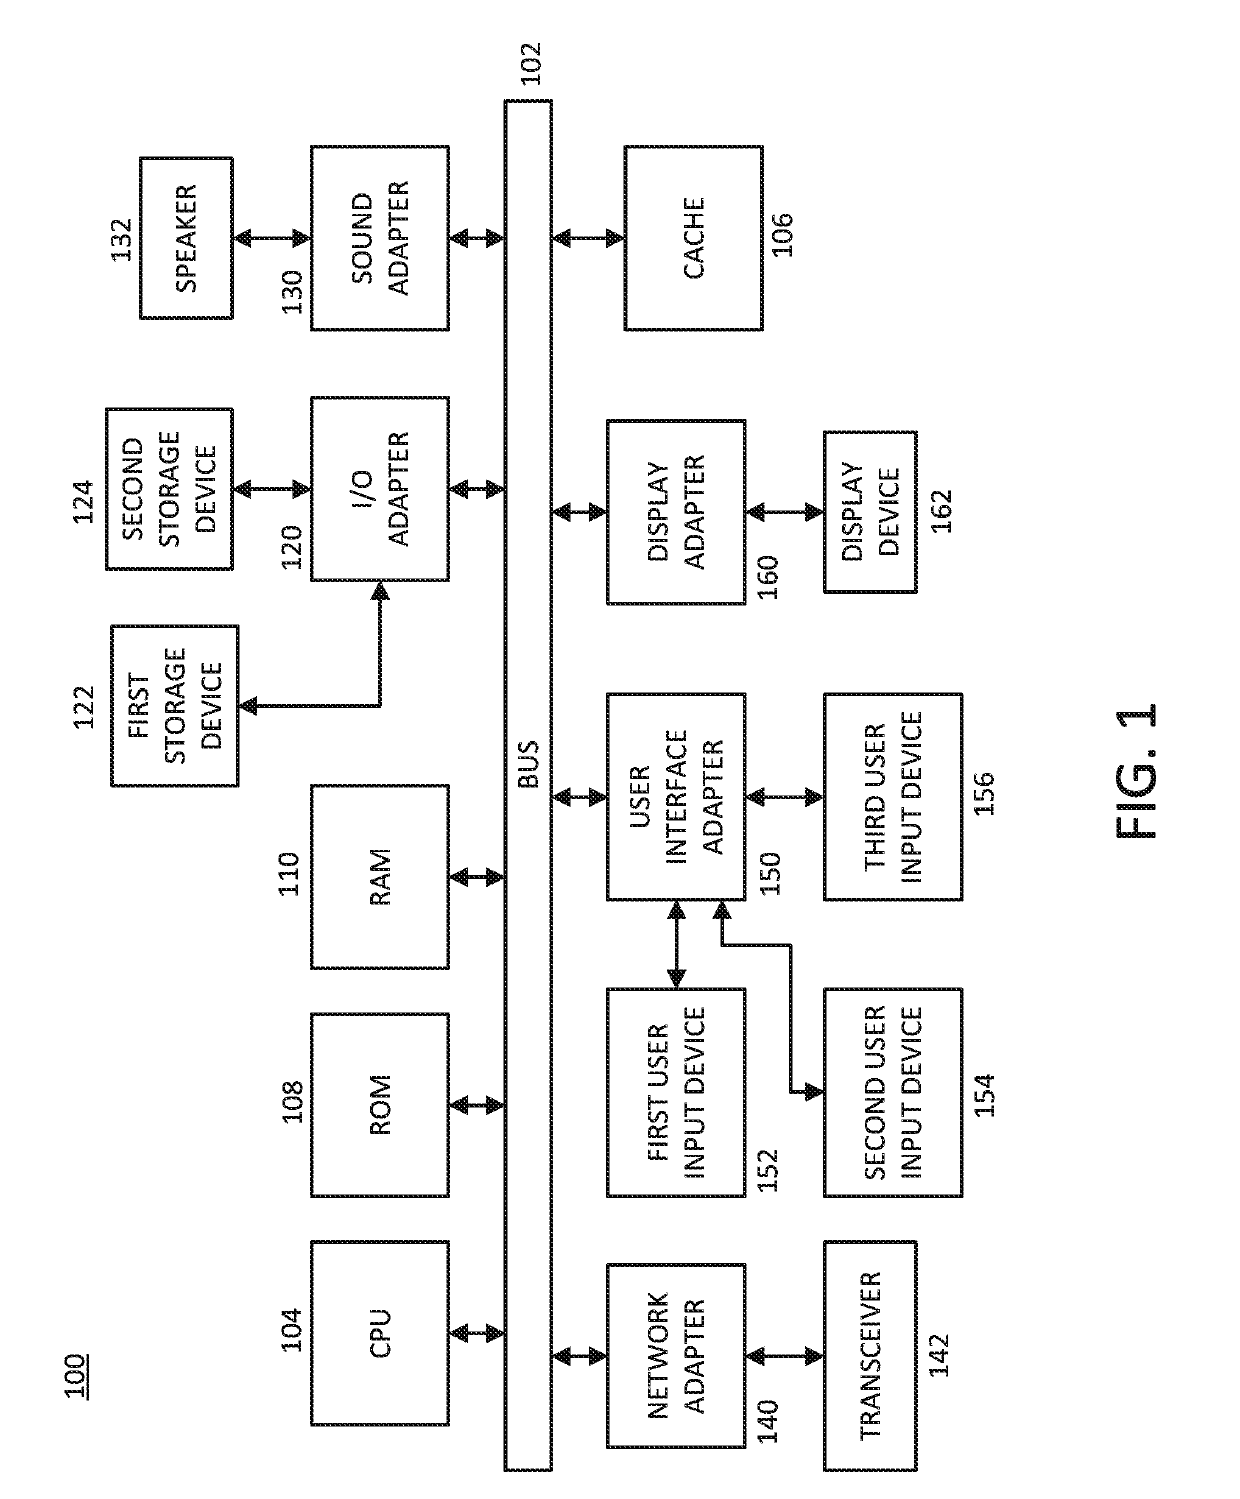 Aging profiling engine for physical systems